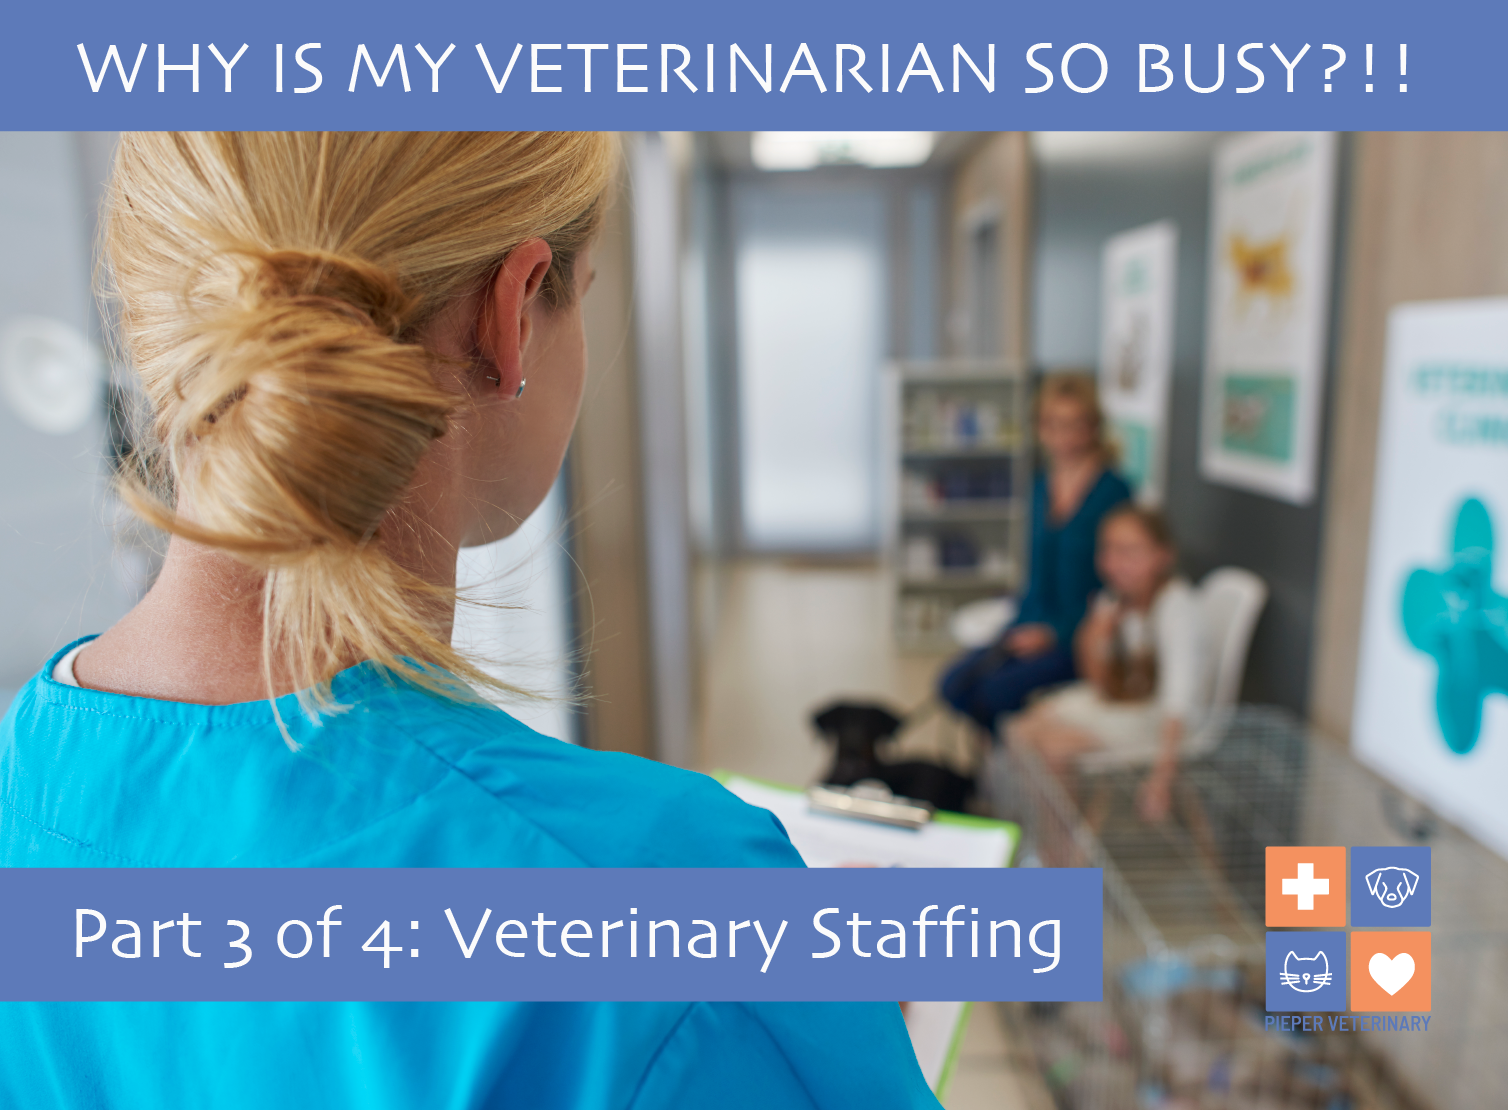 Busy Vet Images 04